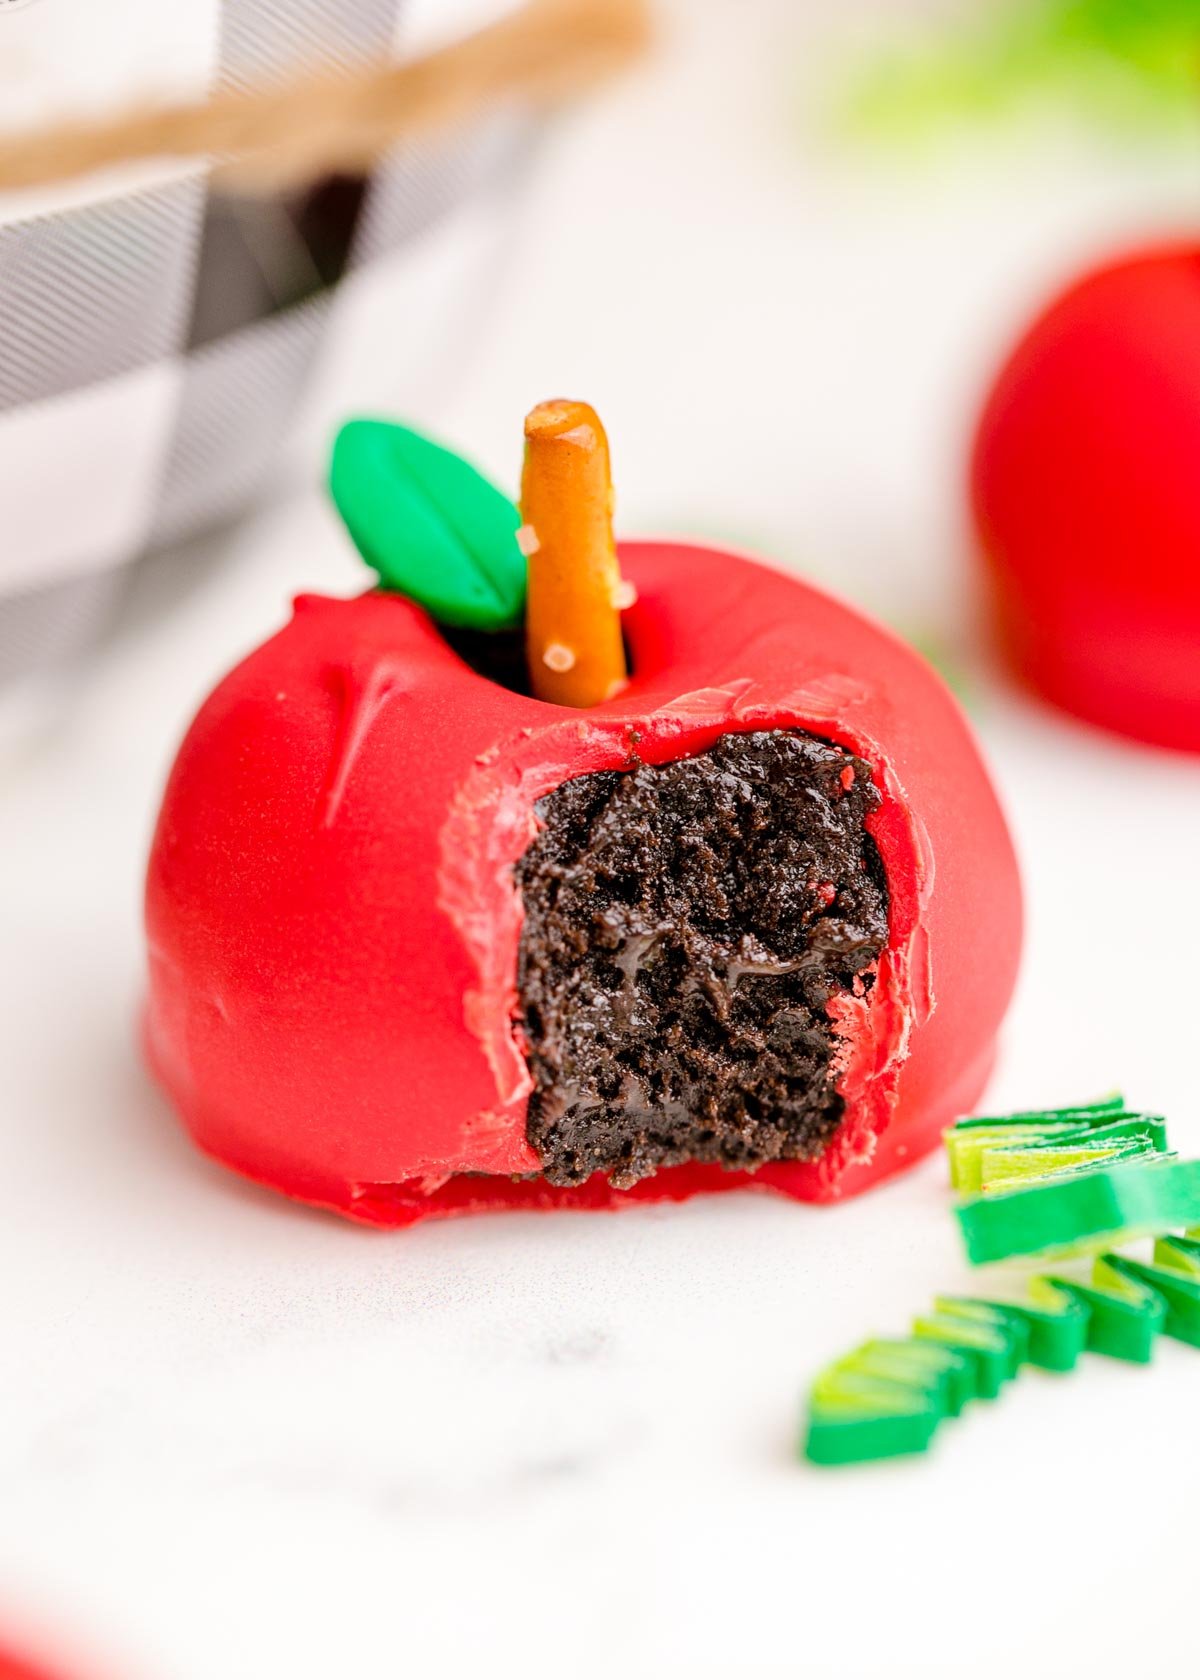 apple shaped Oreo ball with a bite taken out of it